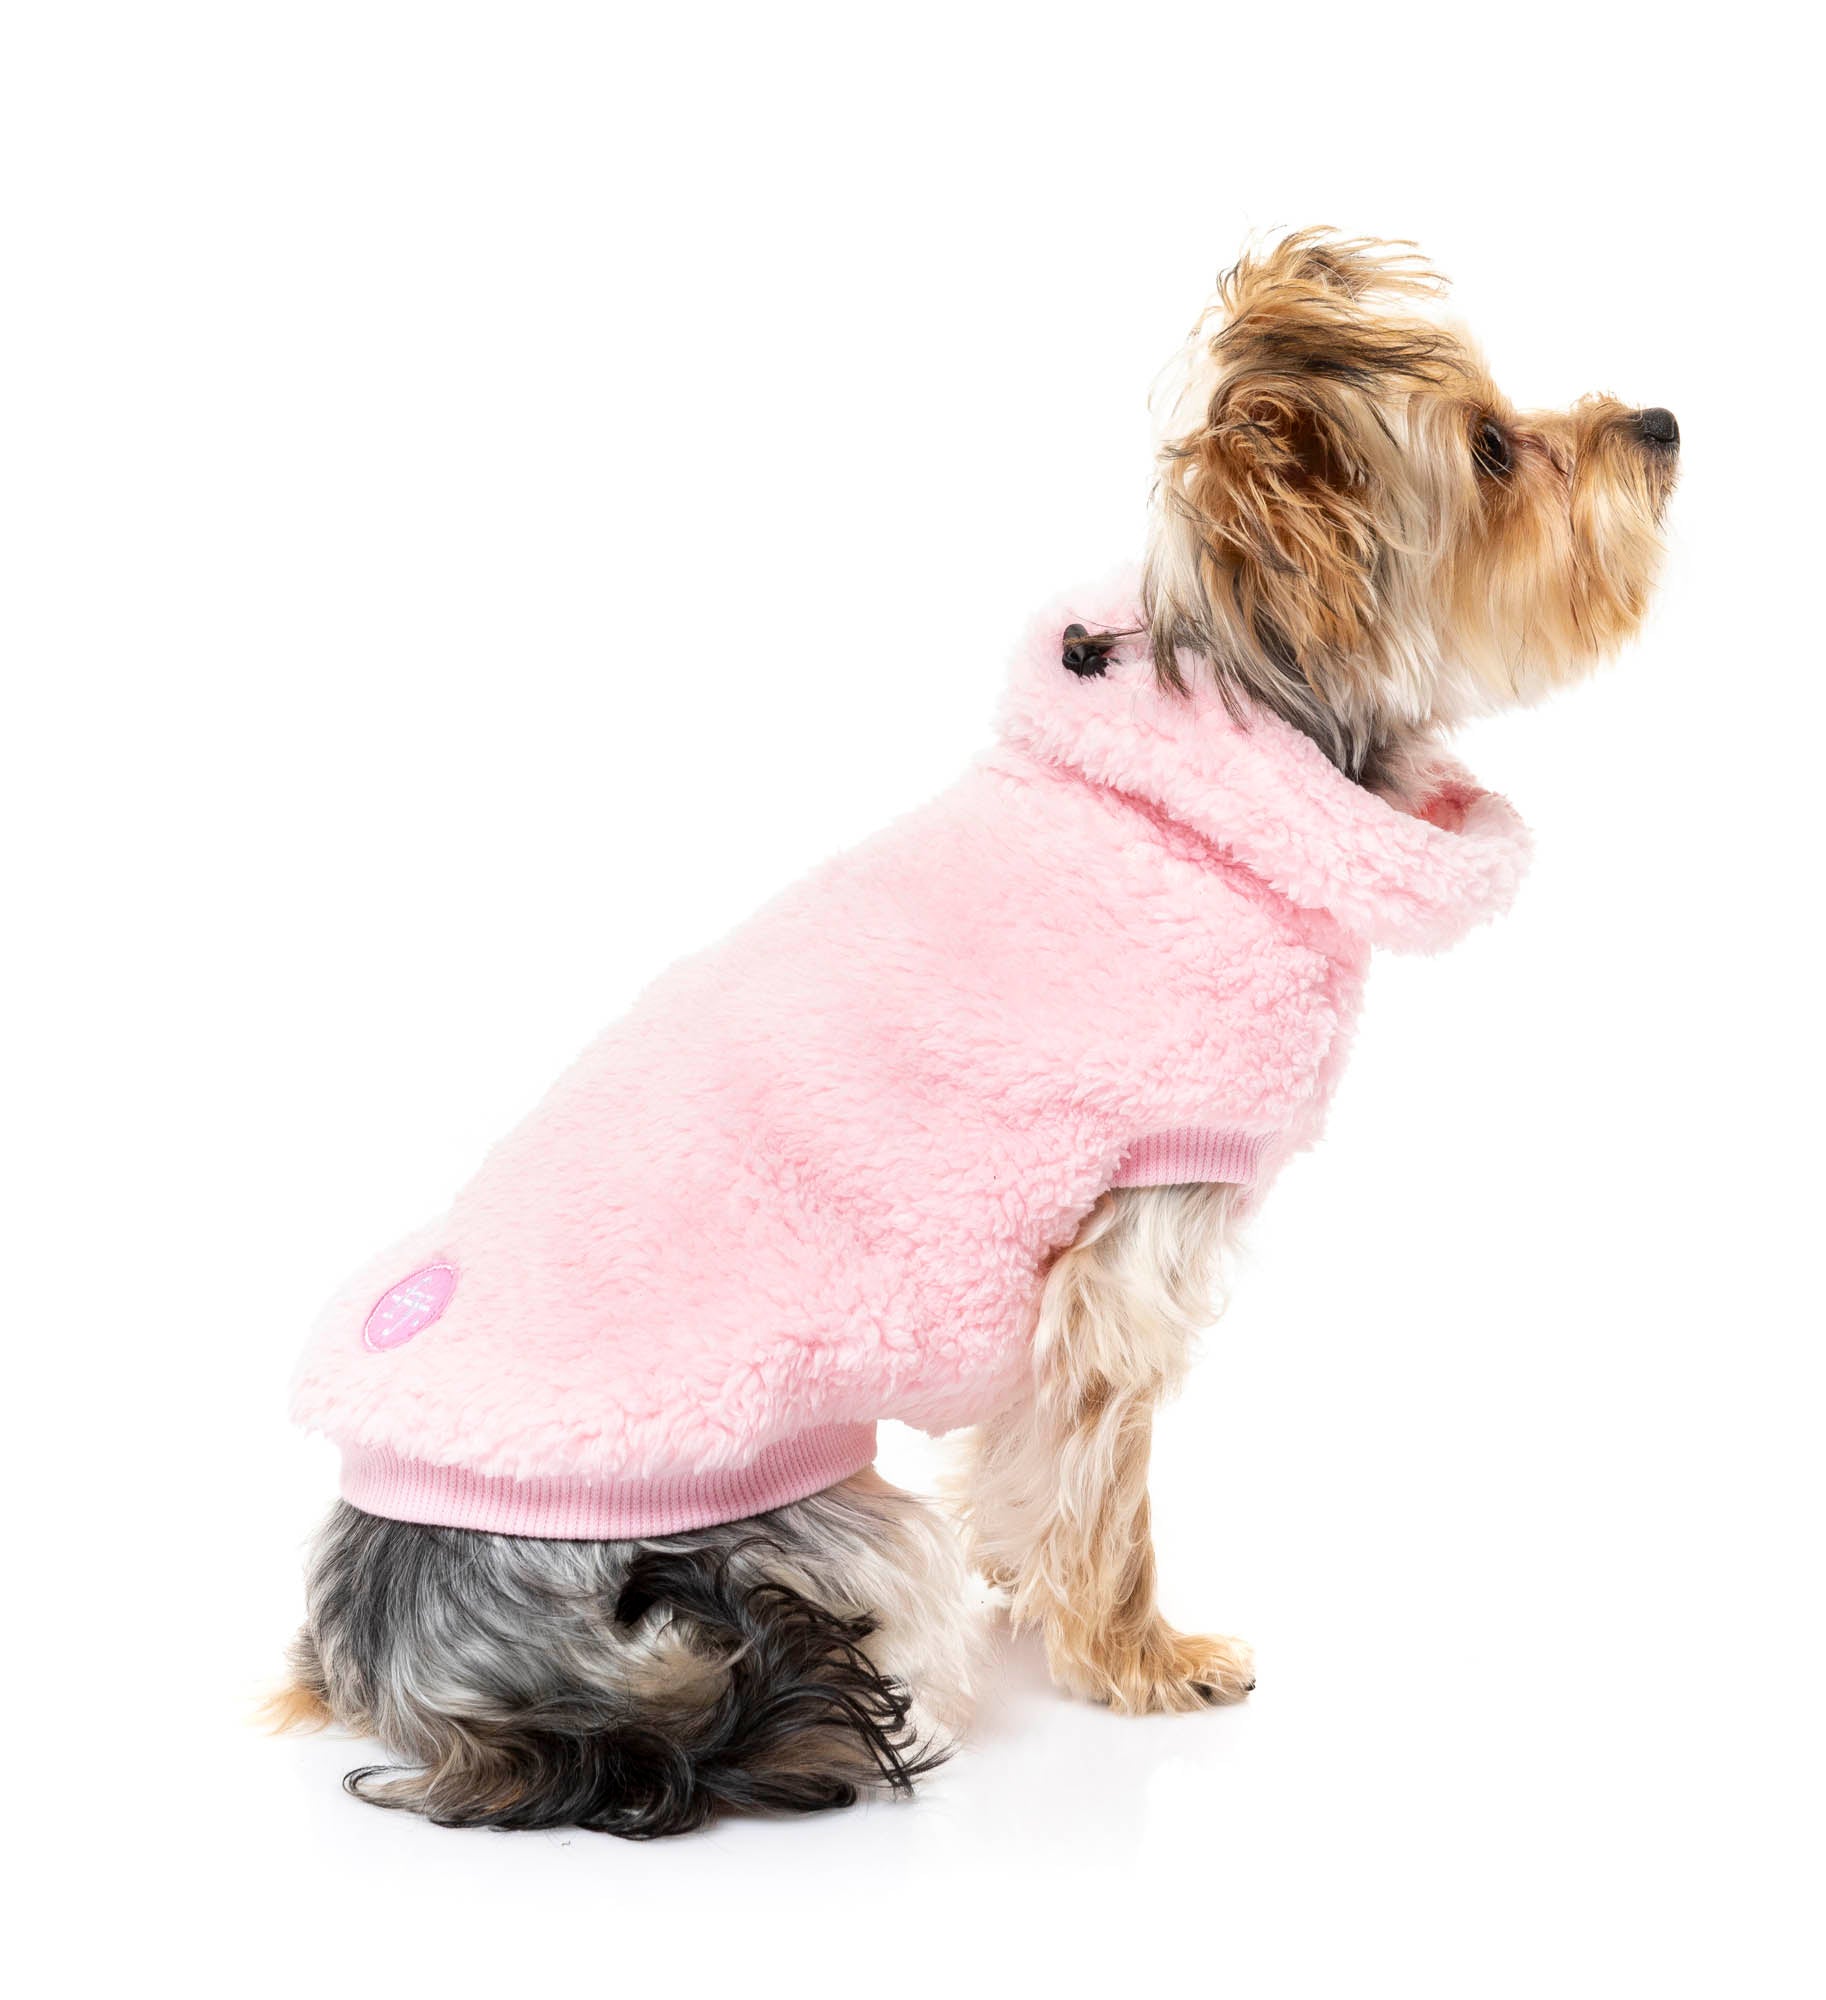 Turtle Teddy Sweater - Pink - SPECIAL OFFER!